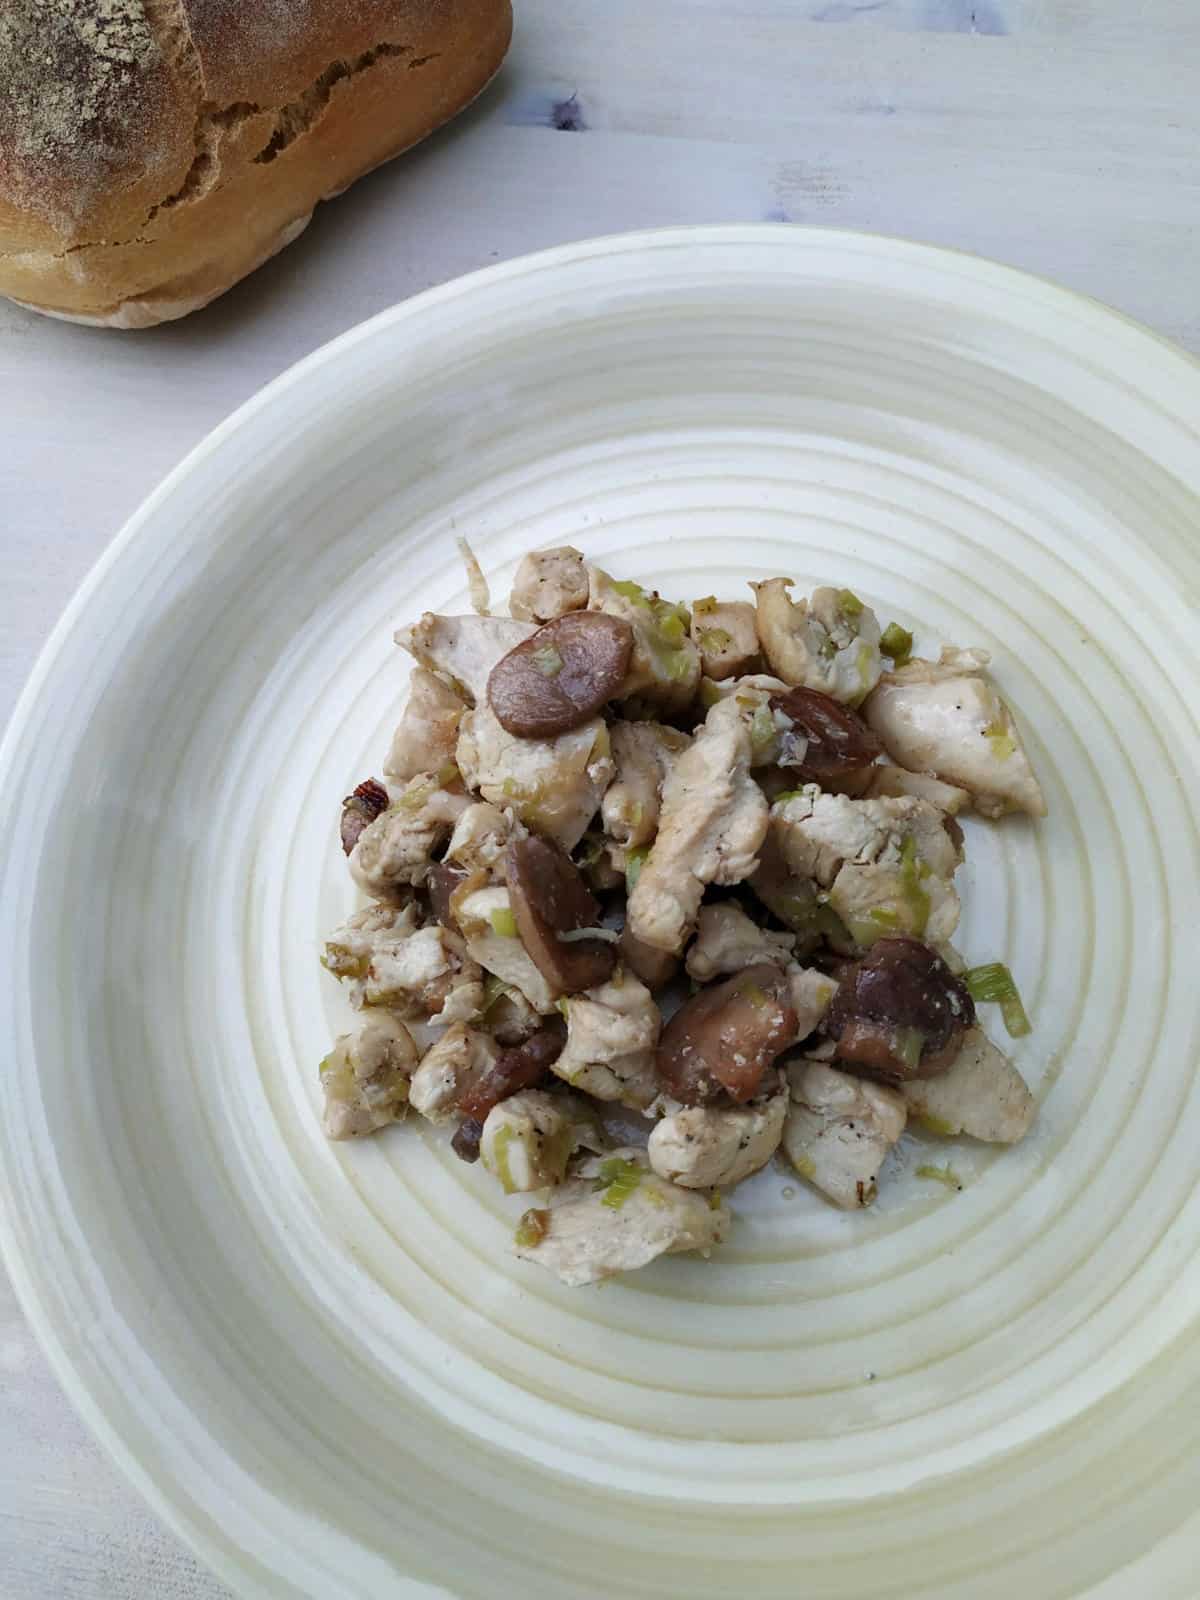 chicken with mushrooms on a white plate from above. It is topped with a few mushrooms